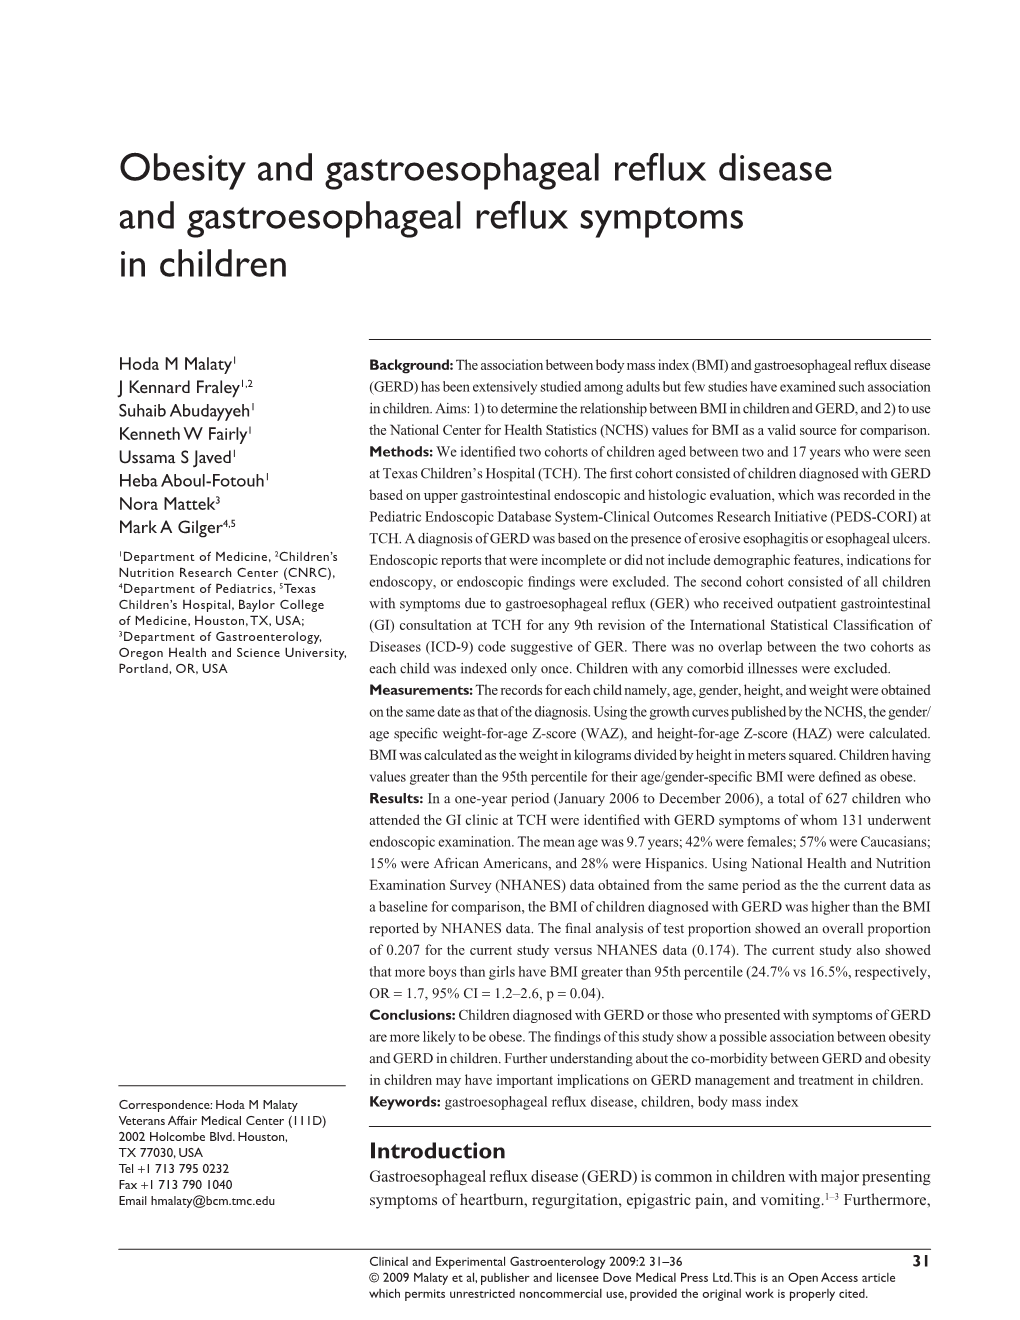 Obesity and Gastroesophageal Reflux Disease and Gastroesophageal